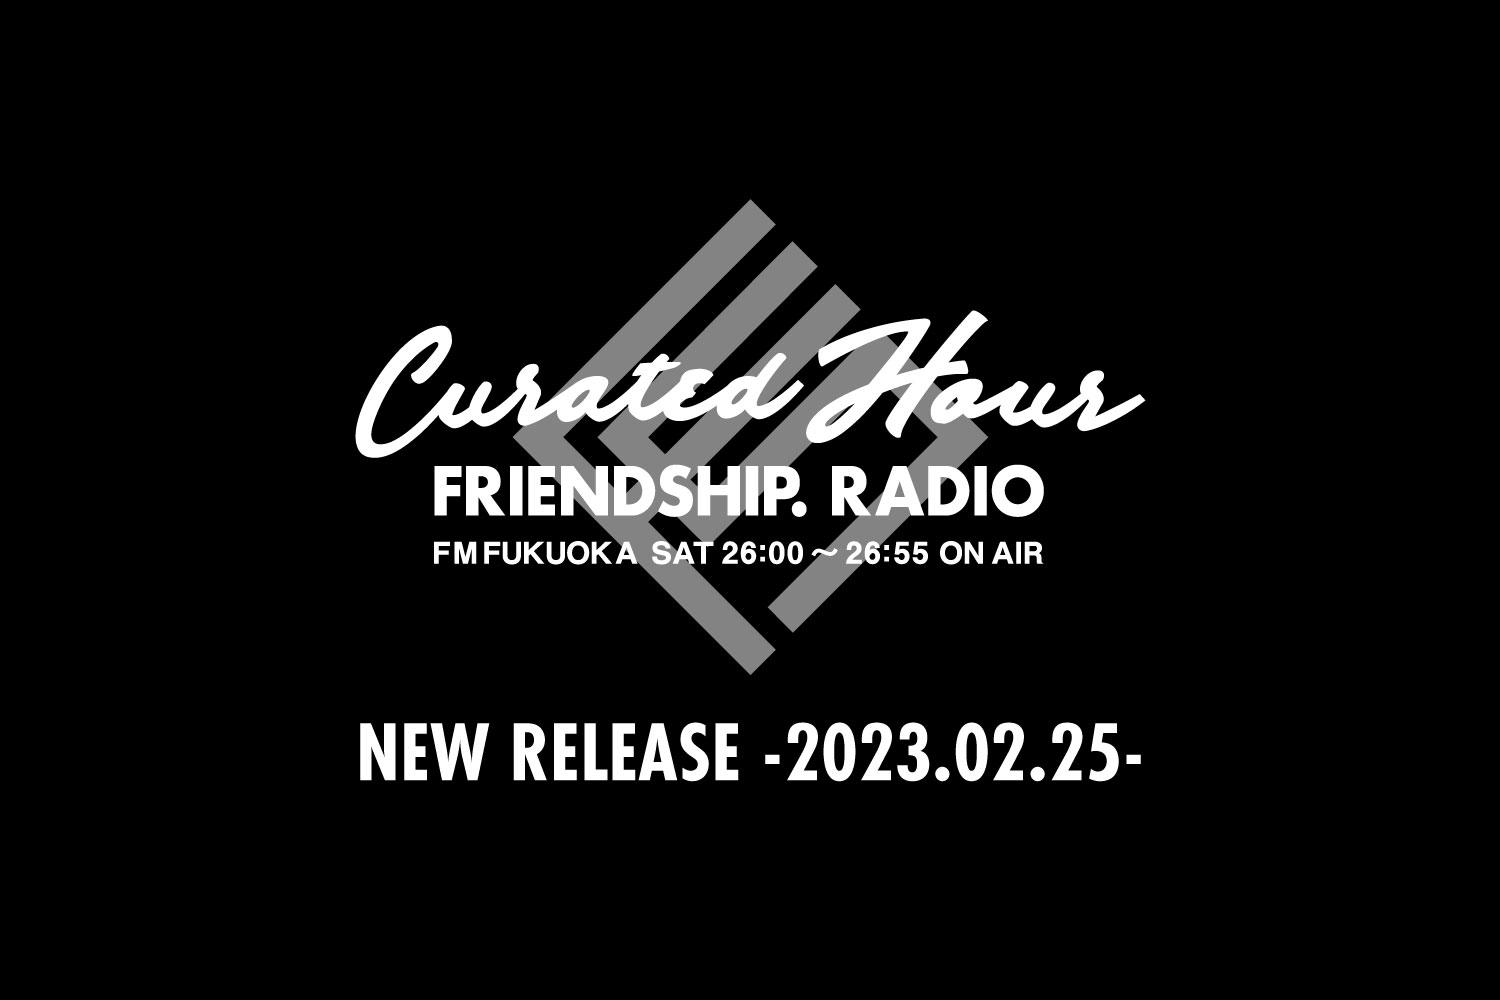 FRIENDSHIP.の最新楽曲を紹介！butohes・First Love is Never Returned・futuresほか全22作品 -2023.02.25-